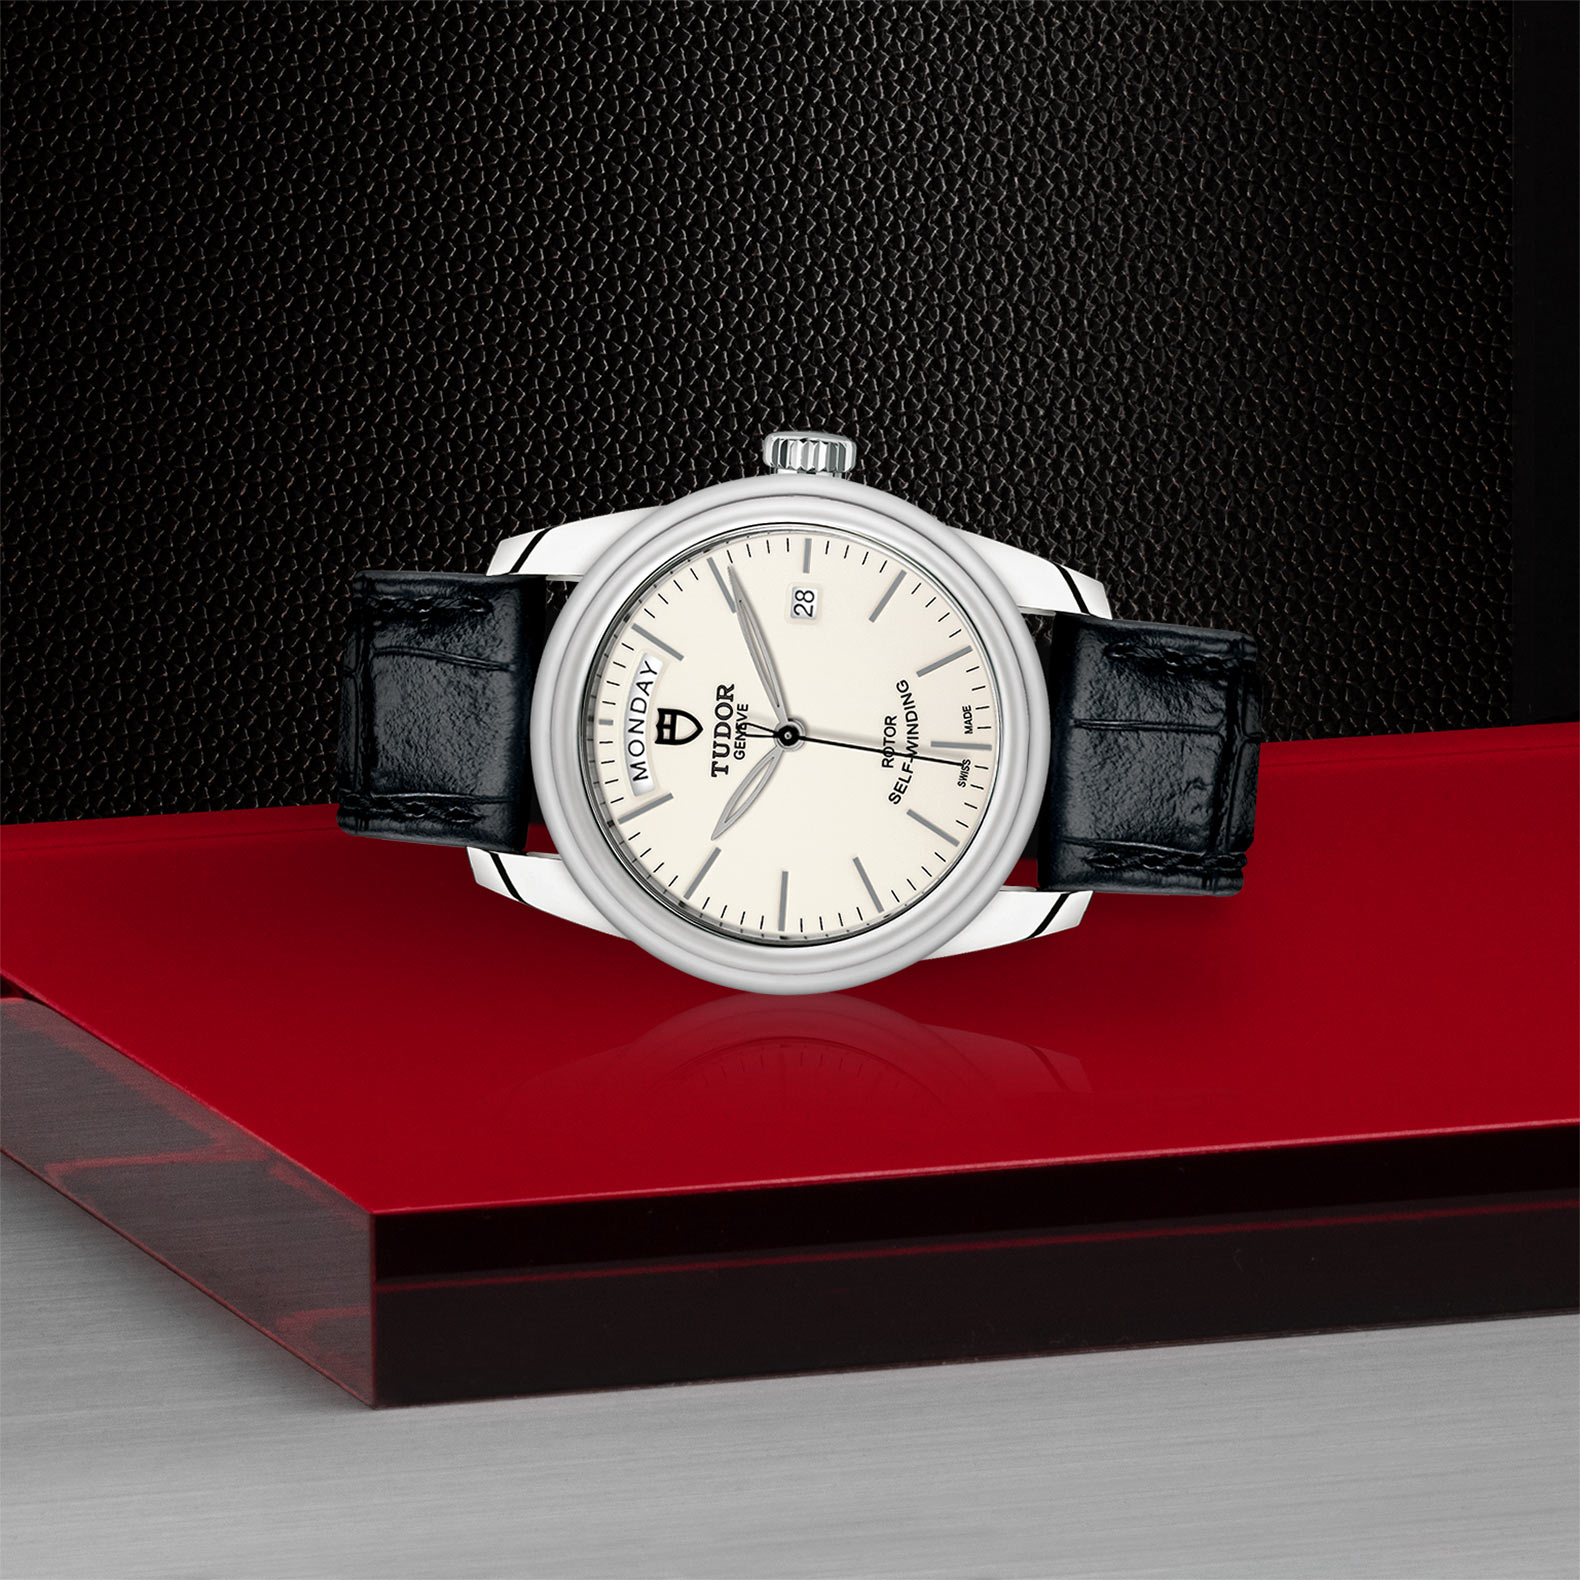 TUDOR Glamour Date+Day - M56000-0176